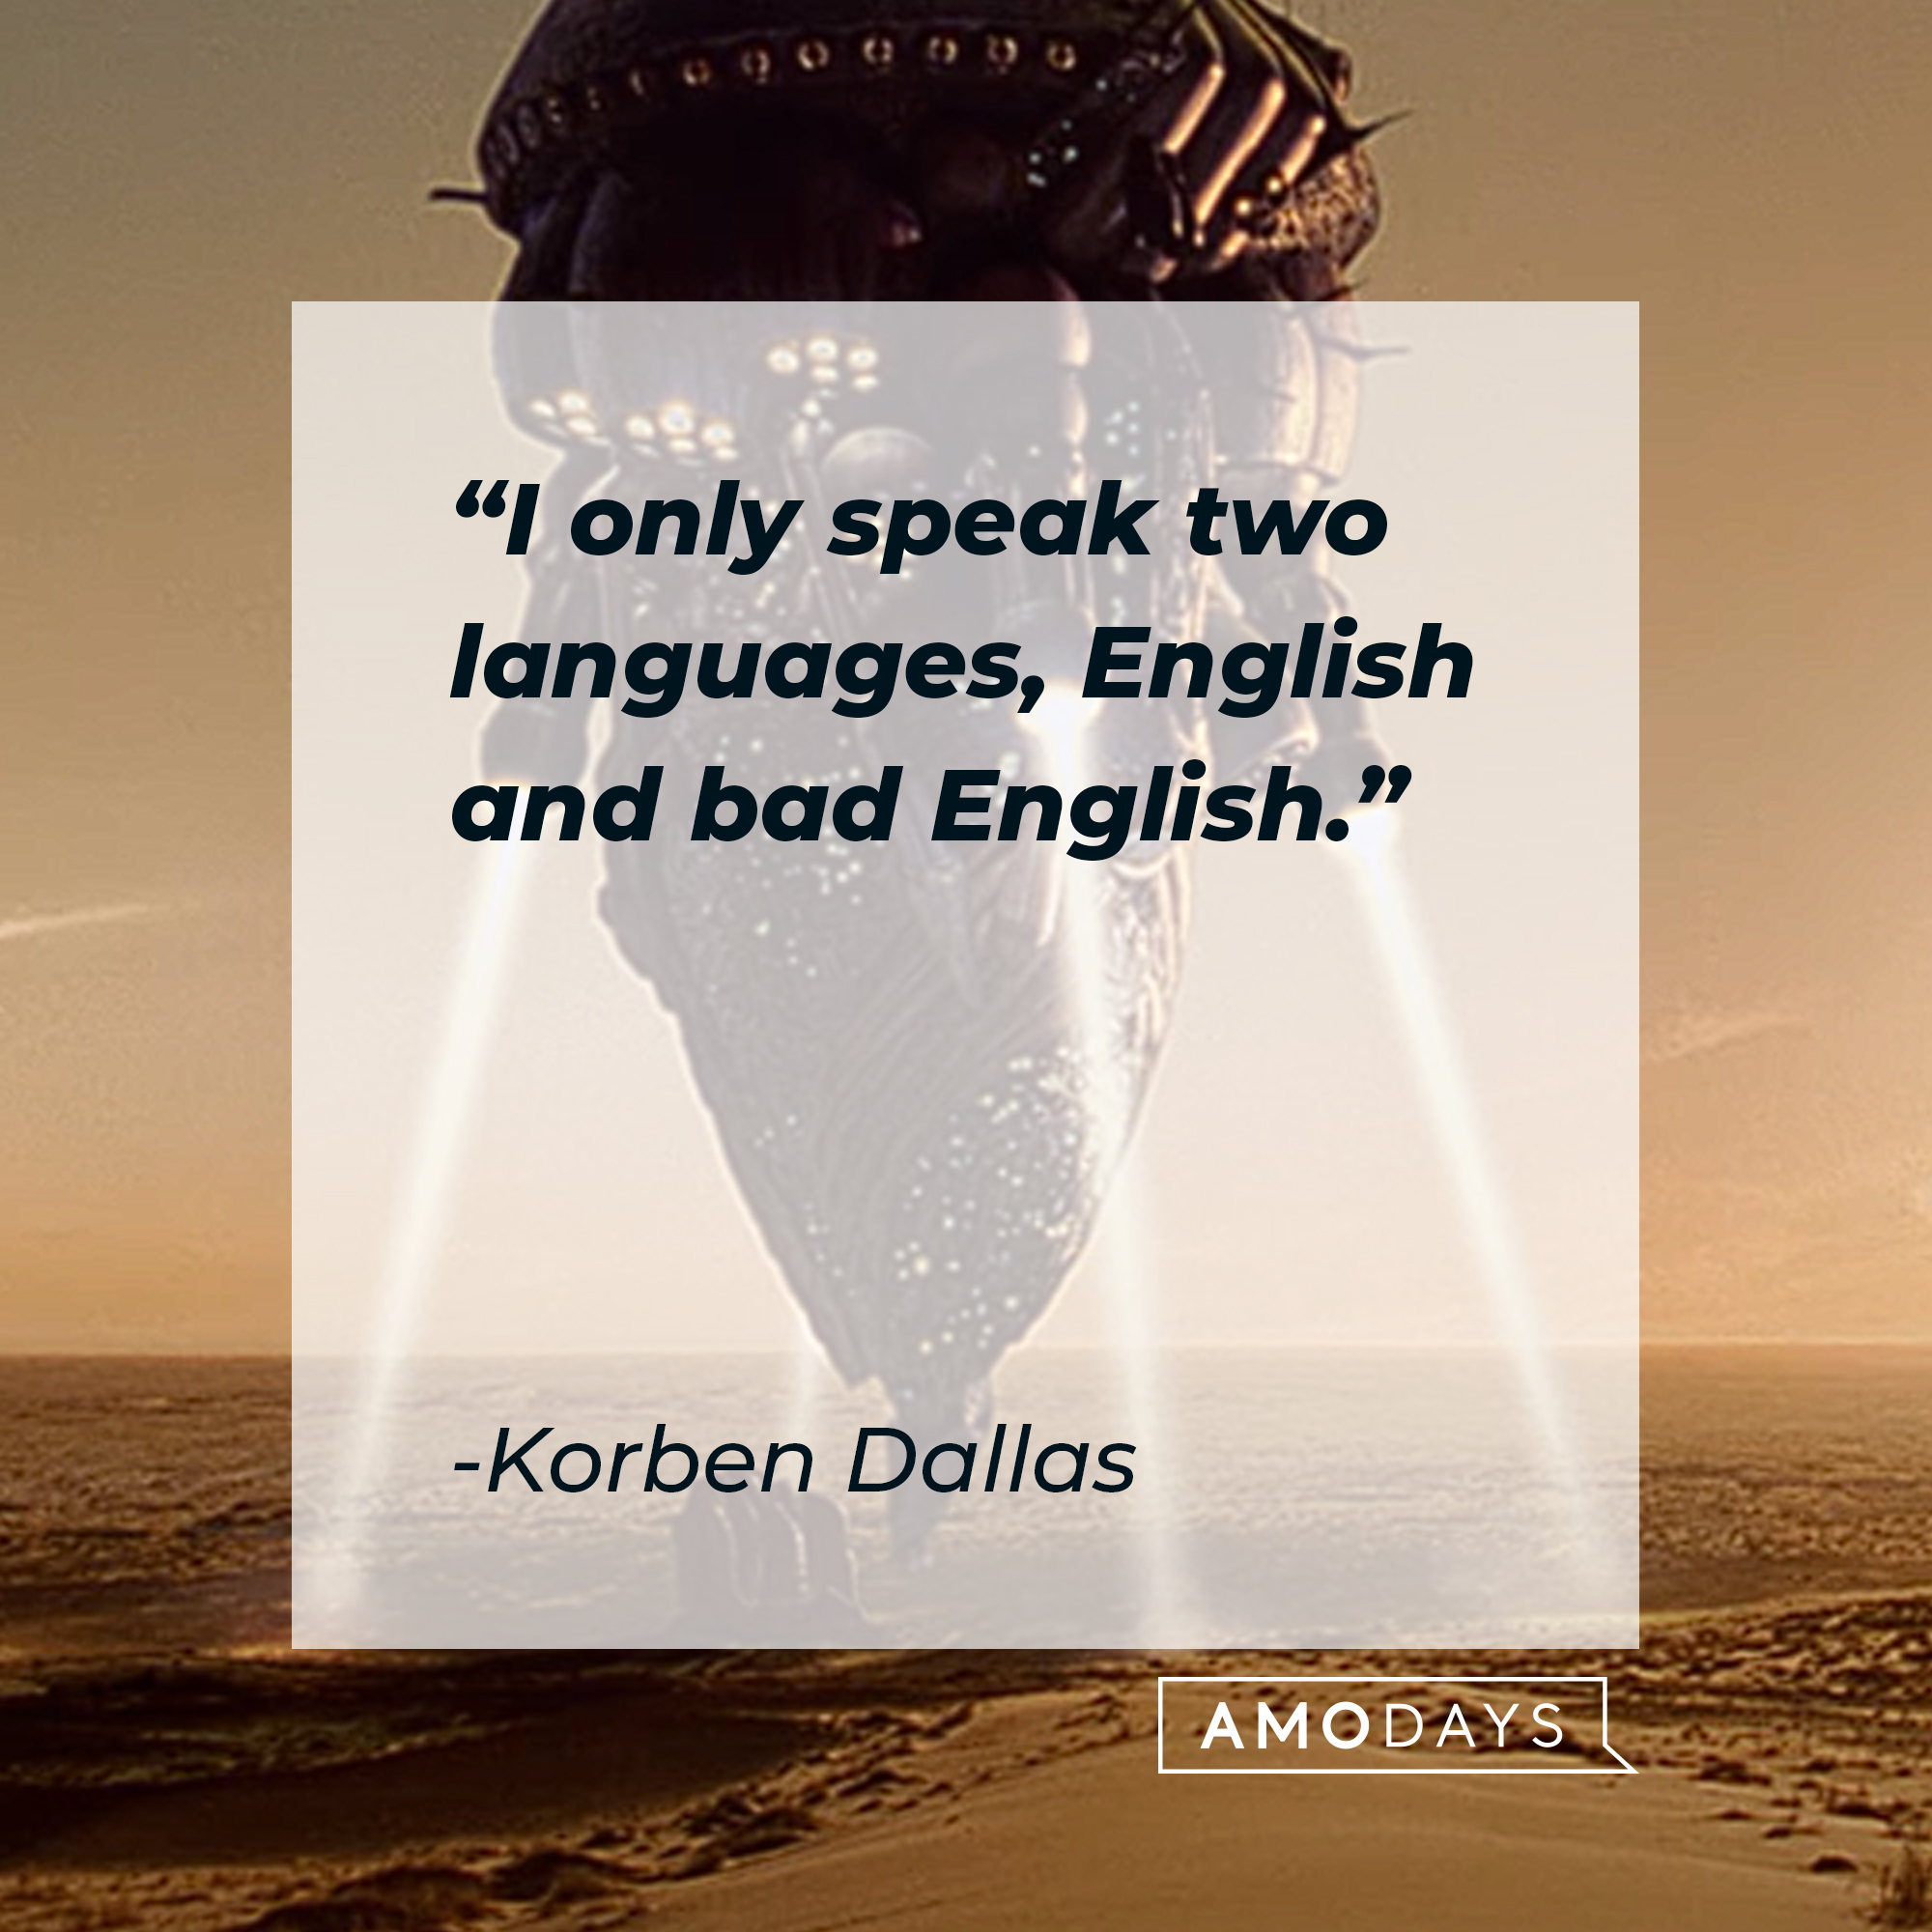 Korben Dallas' quote: "I only speak two languages, English and bad English." | Source: youtube.com/sonypictures